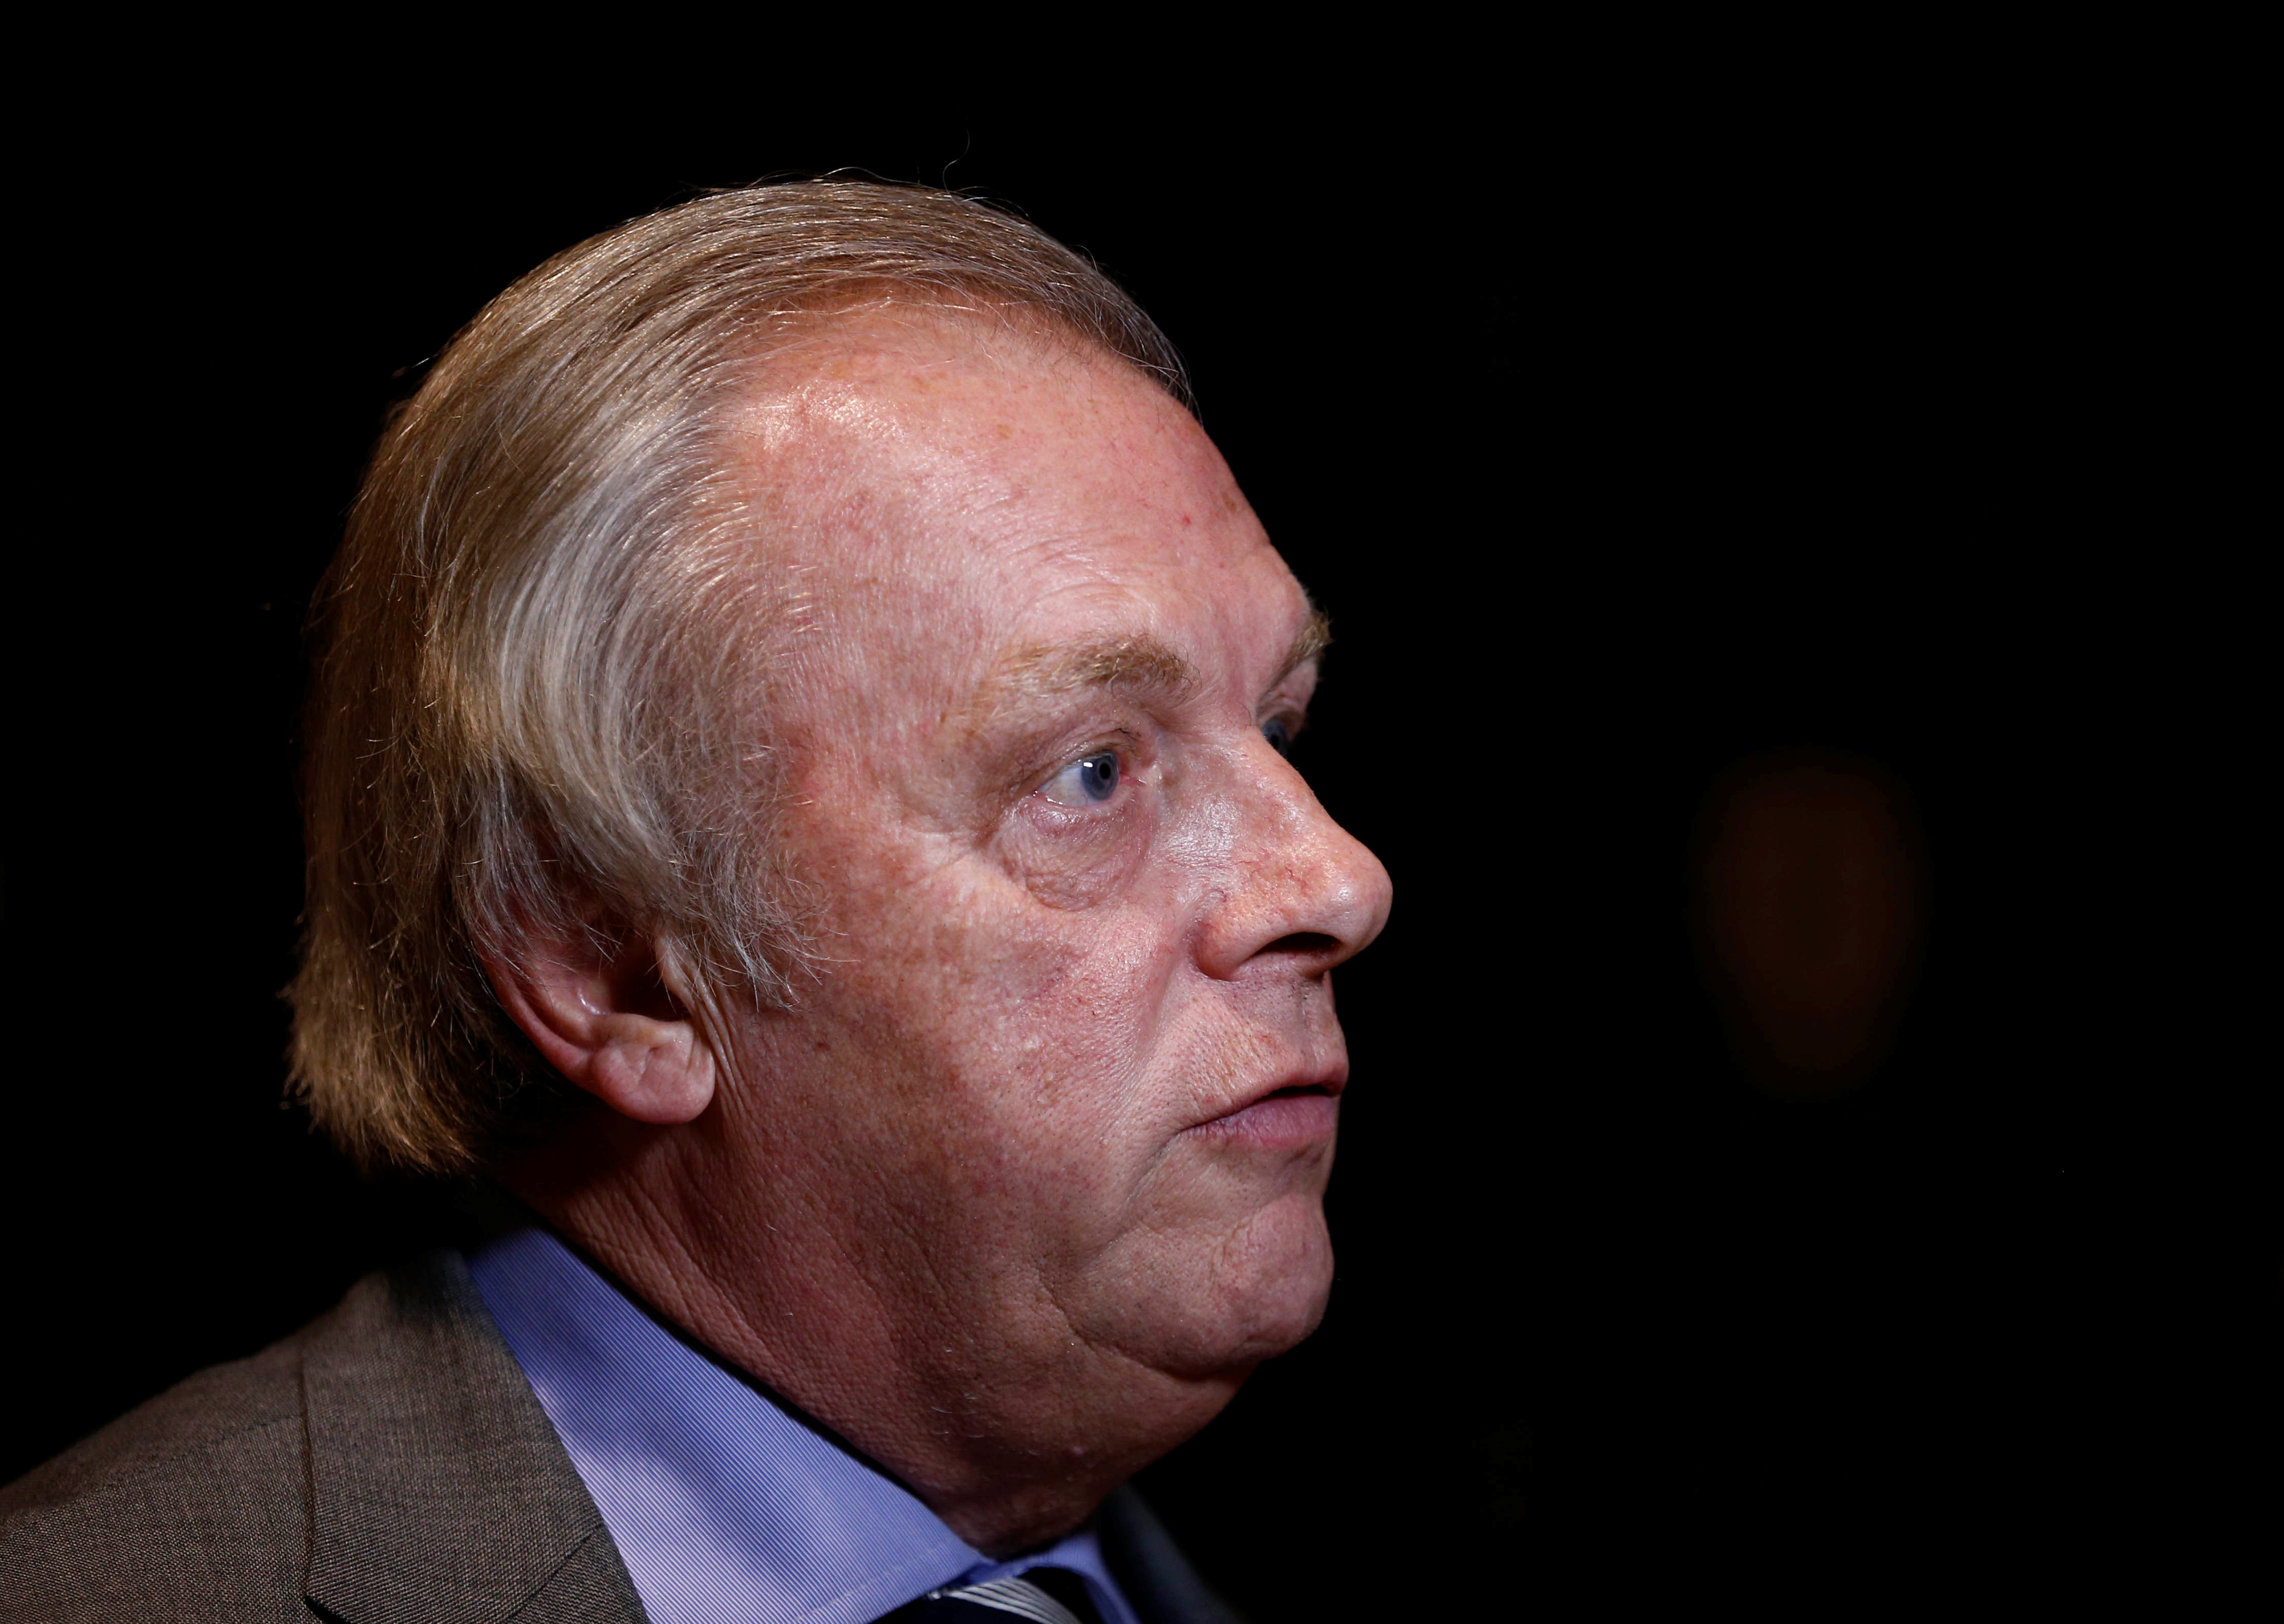 Gordon Taylor plans to leave the Professional Footballers’ Association by the end of the season